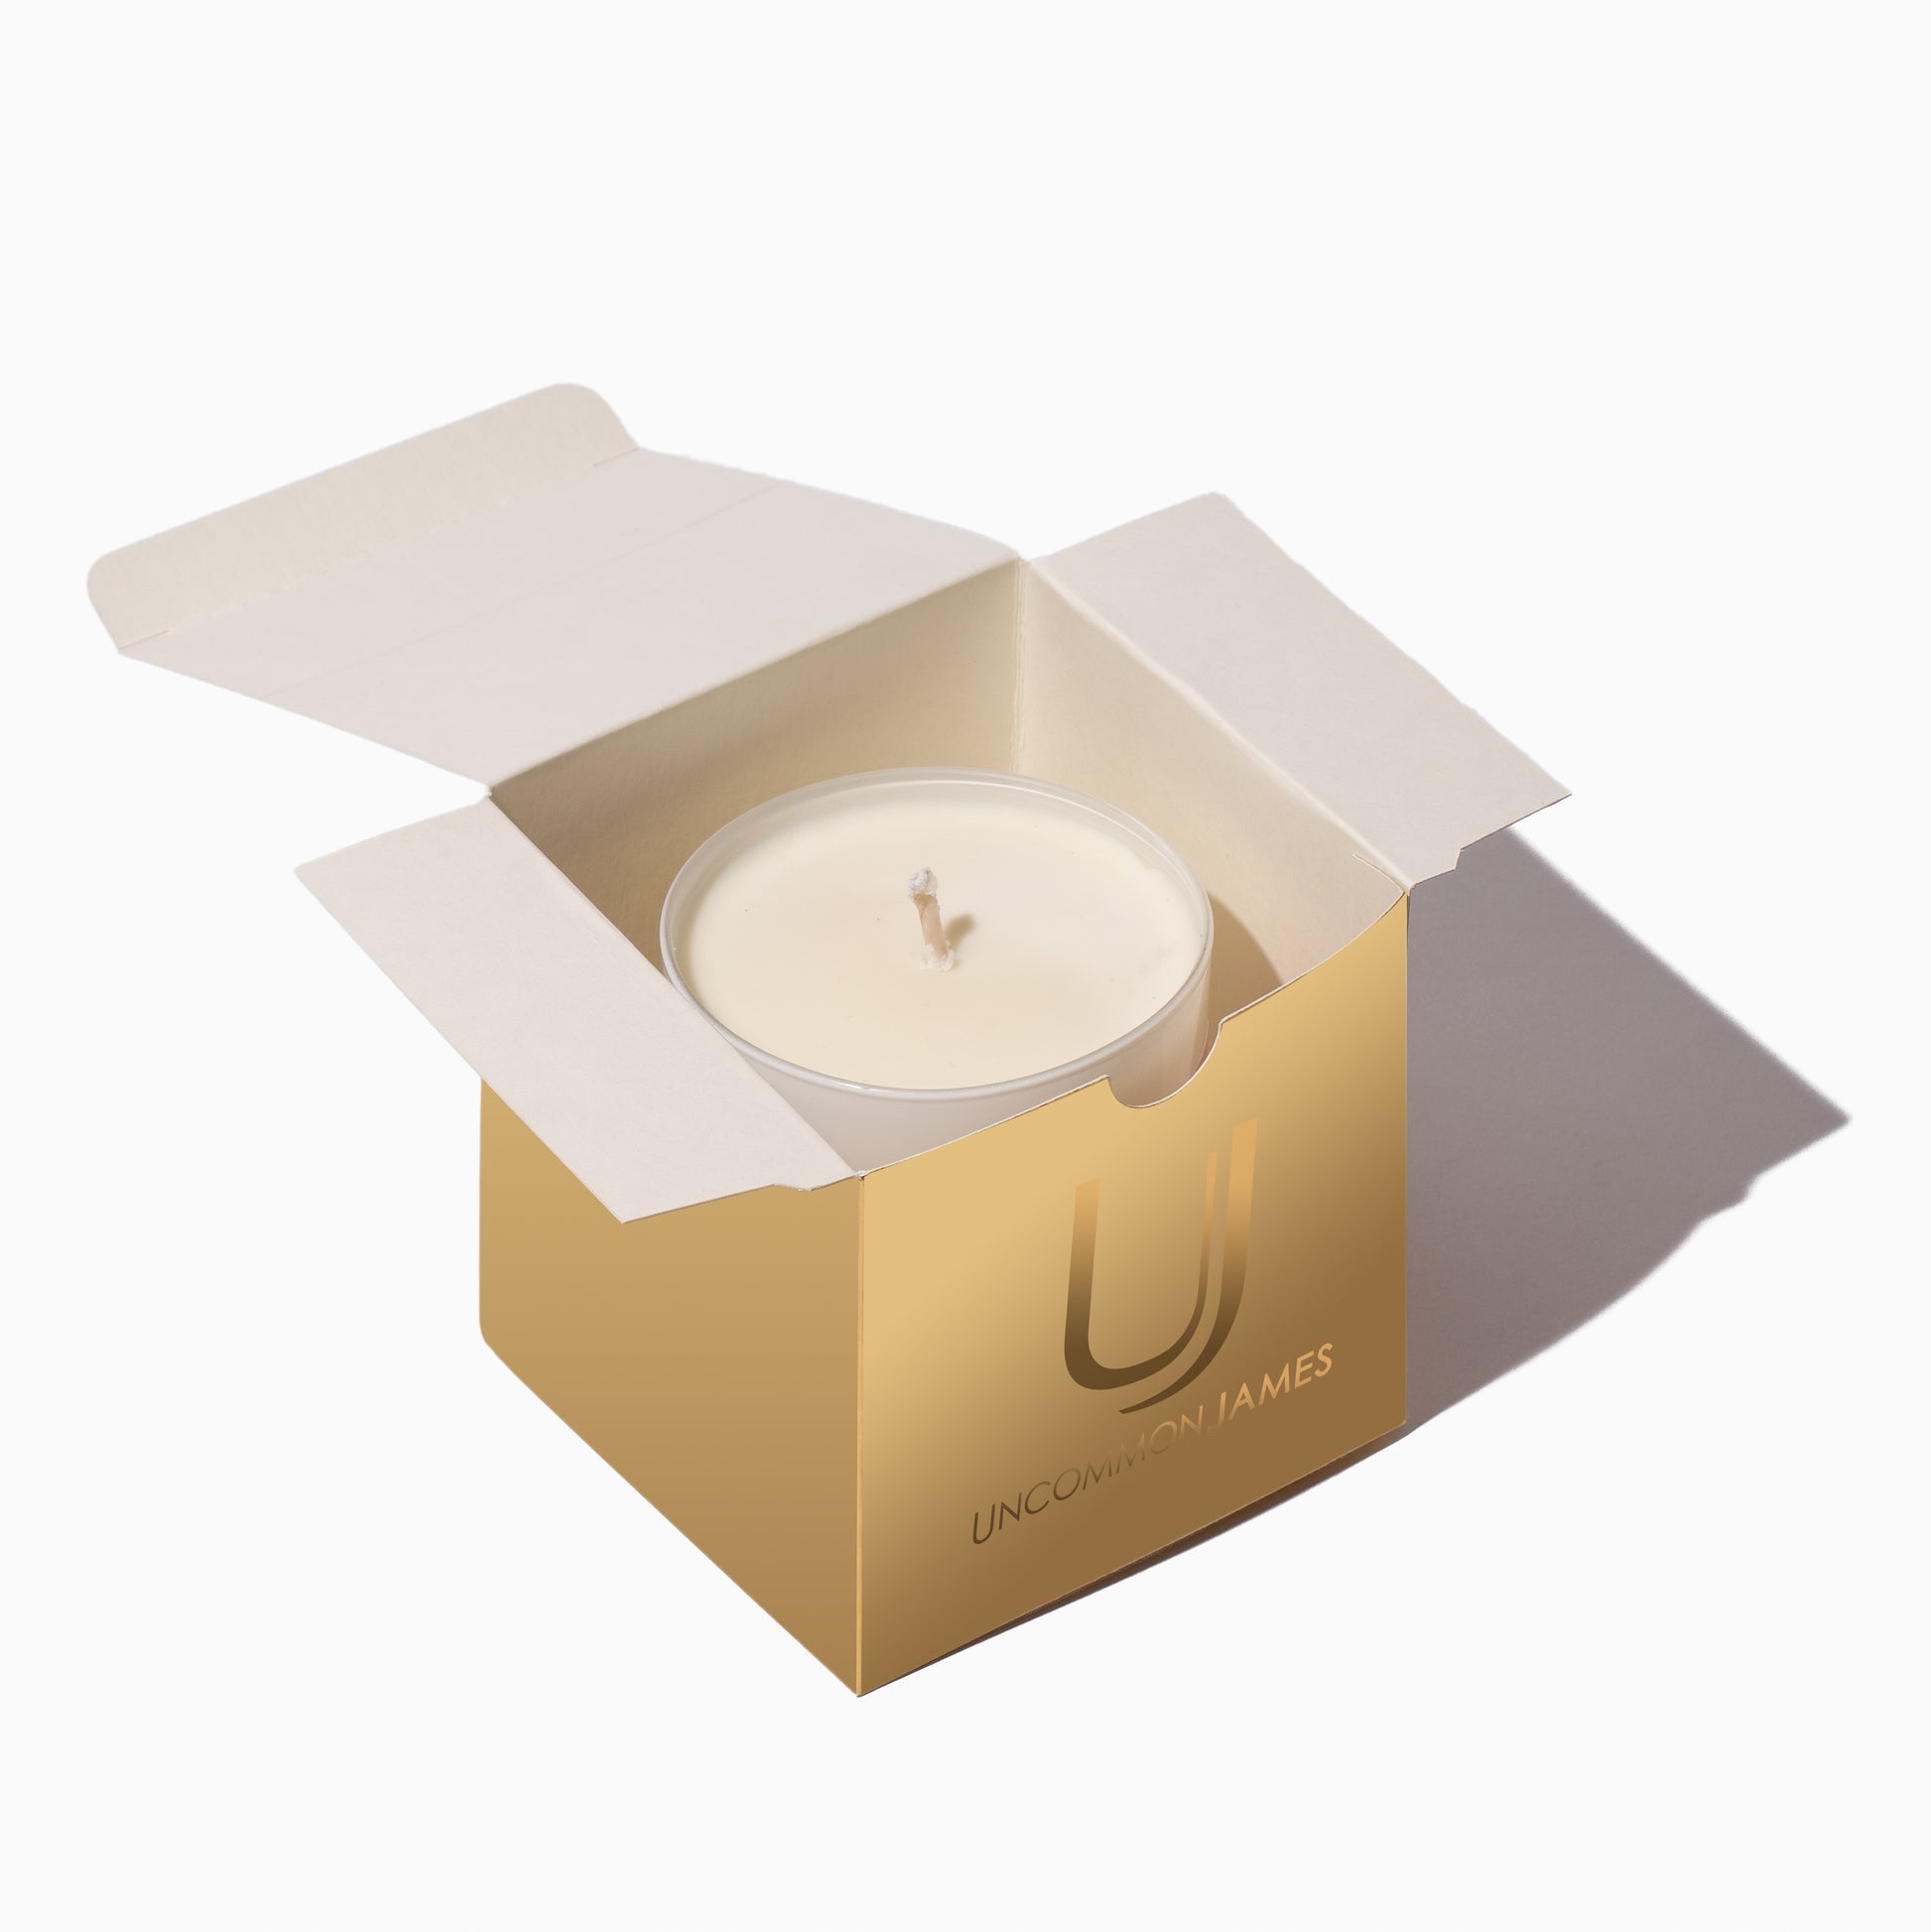 10 oz. Candle Gift Box | Product Image | Uncommon James Home